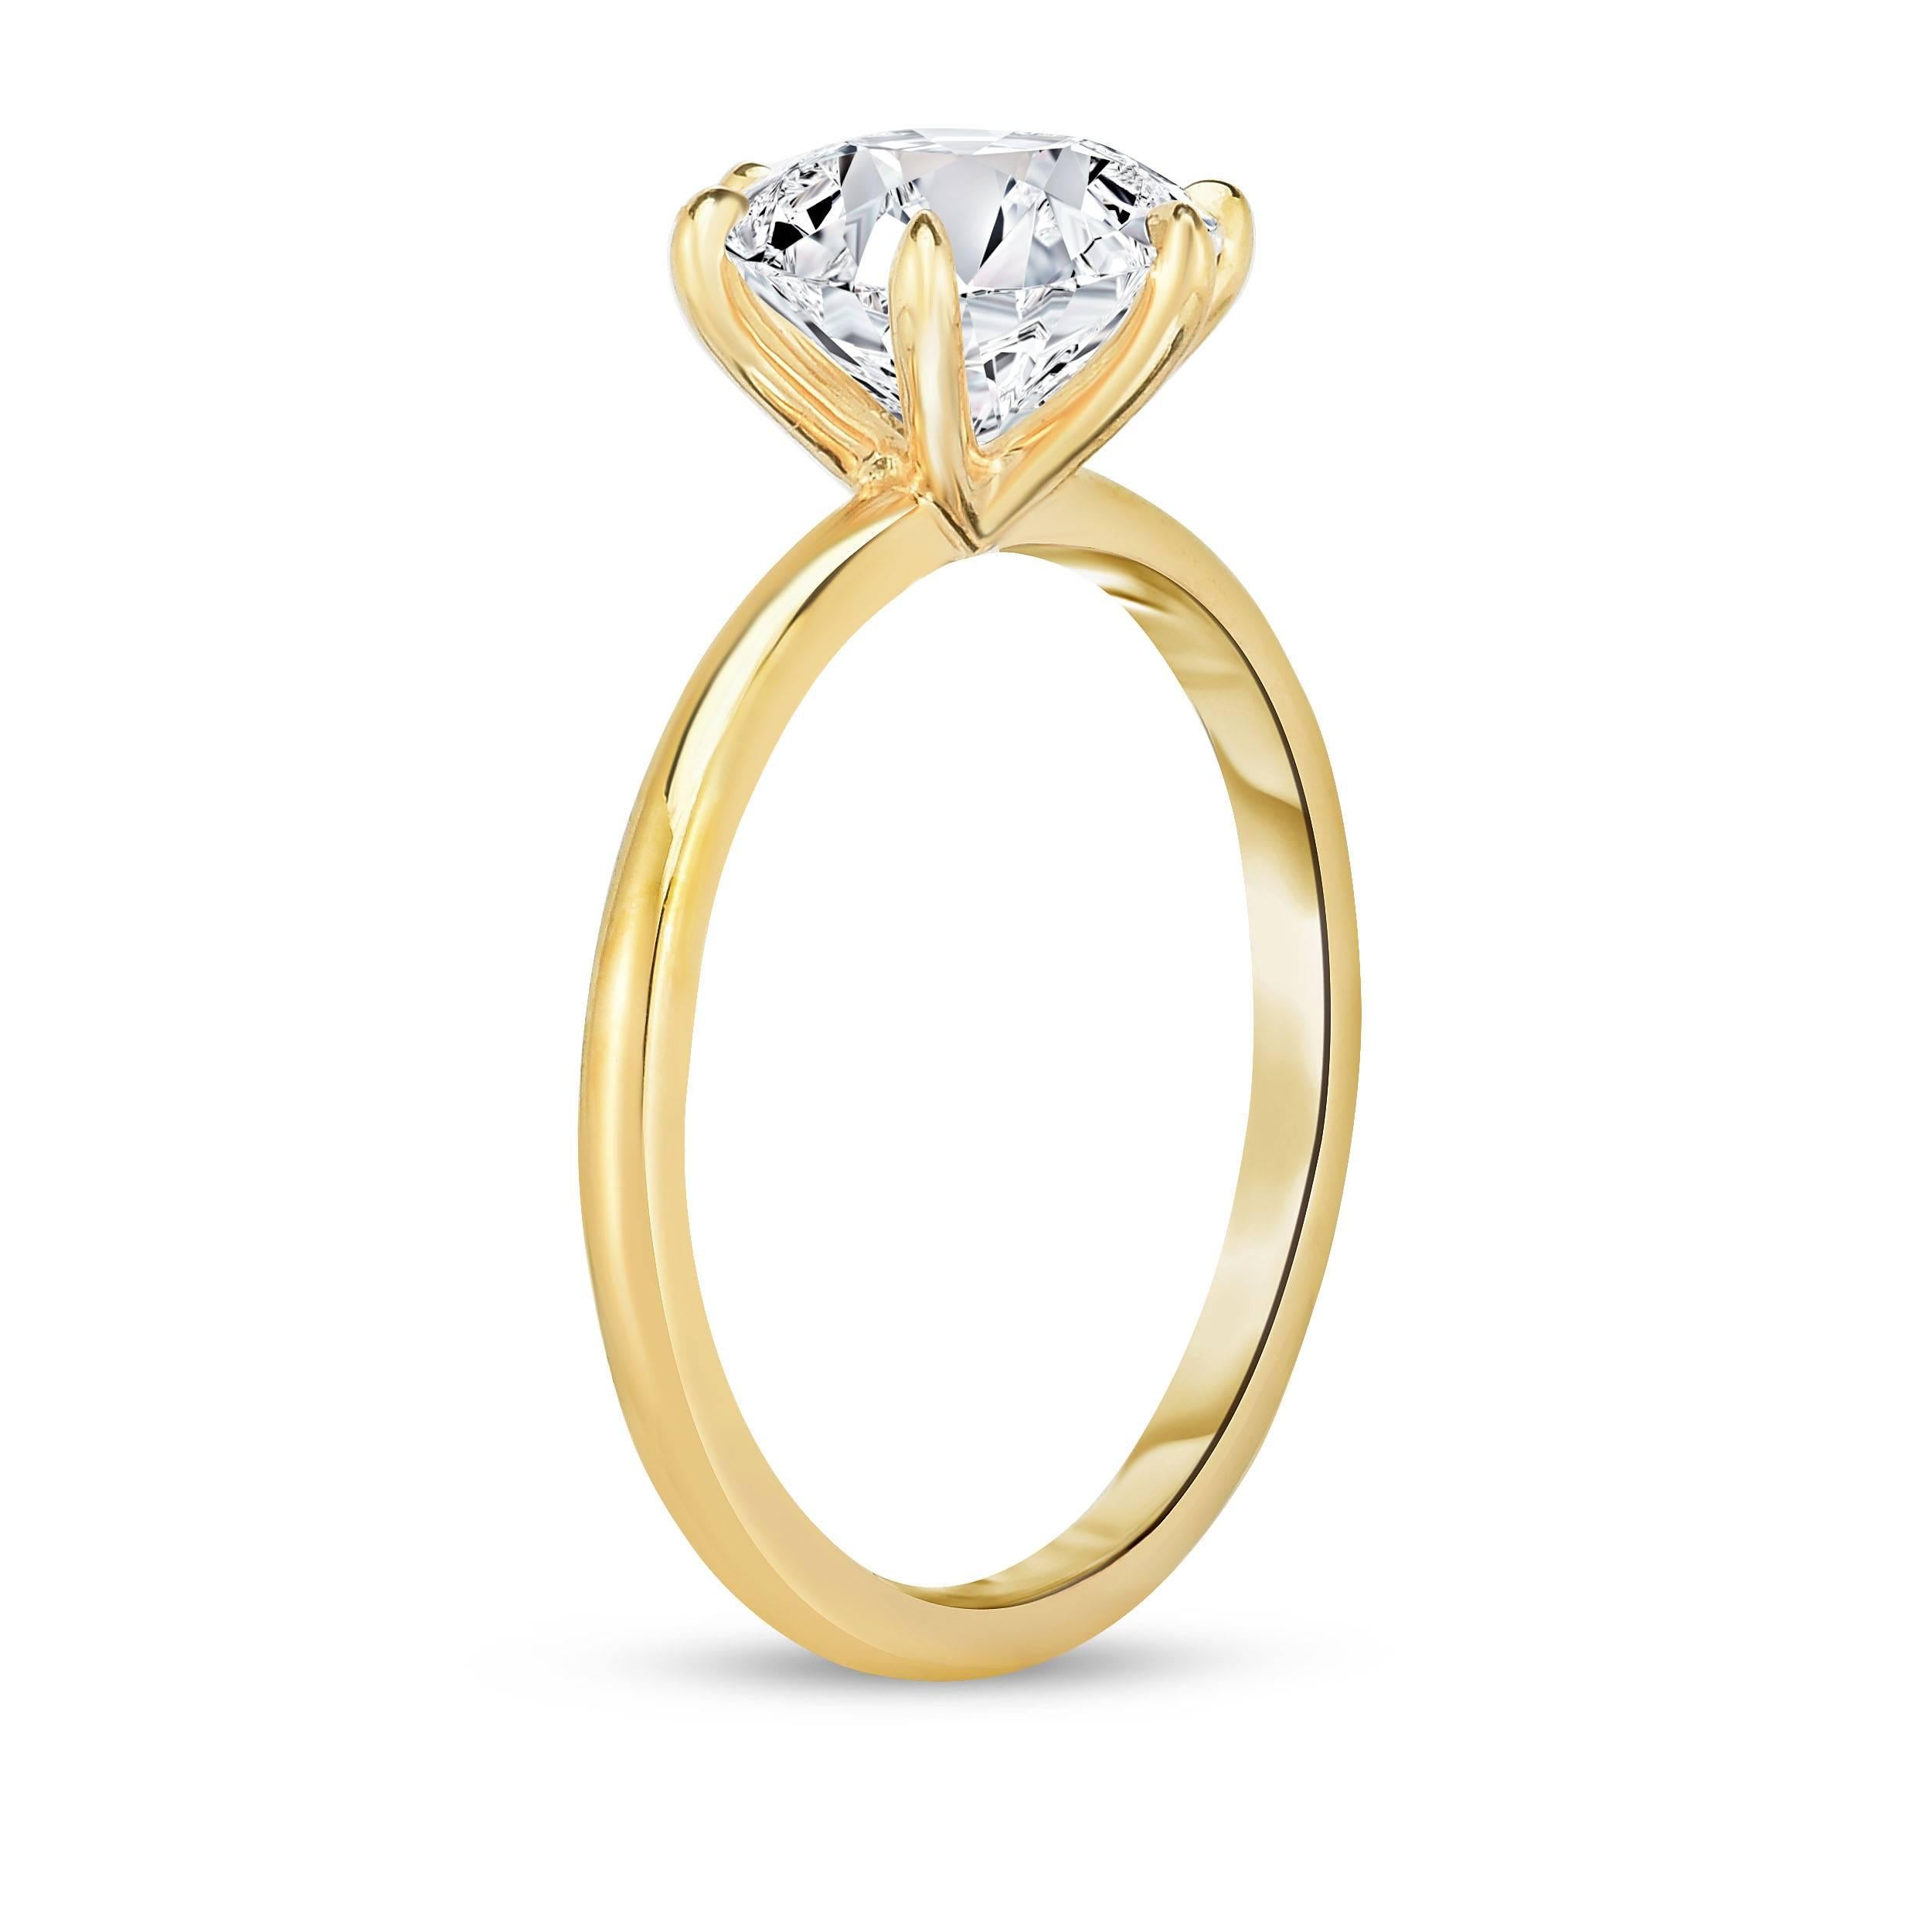 
GIA certified 2.08 carat round solitaire engagement ring. The diamond is exceptionally well cut with an I color and VS2 clarity. Designed and made in New York City, set in 18k yellow gold. 

The six prong ring was designed by Haute Jewelry designer